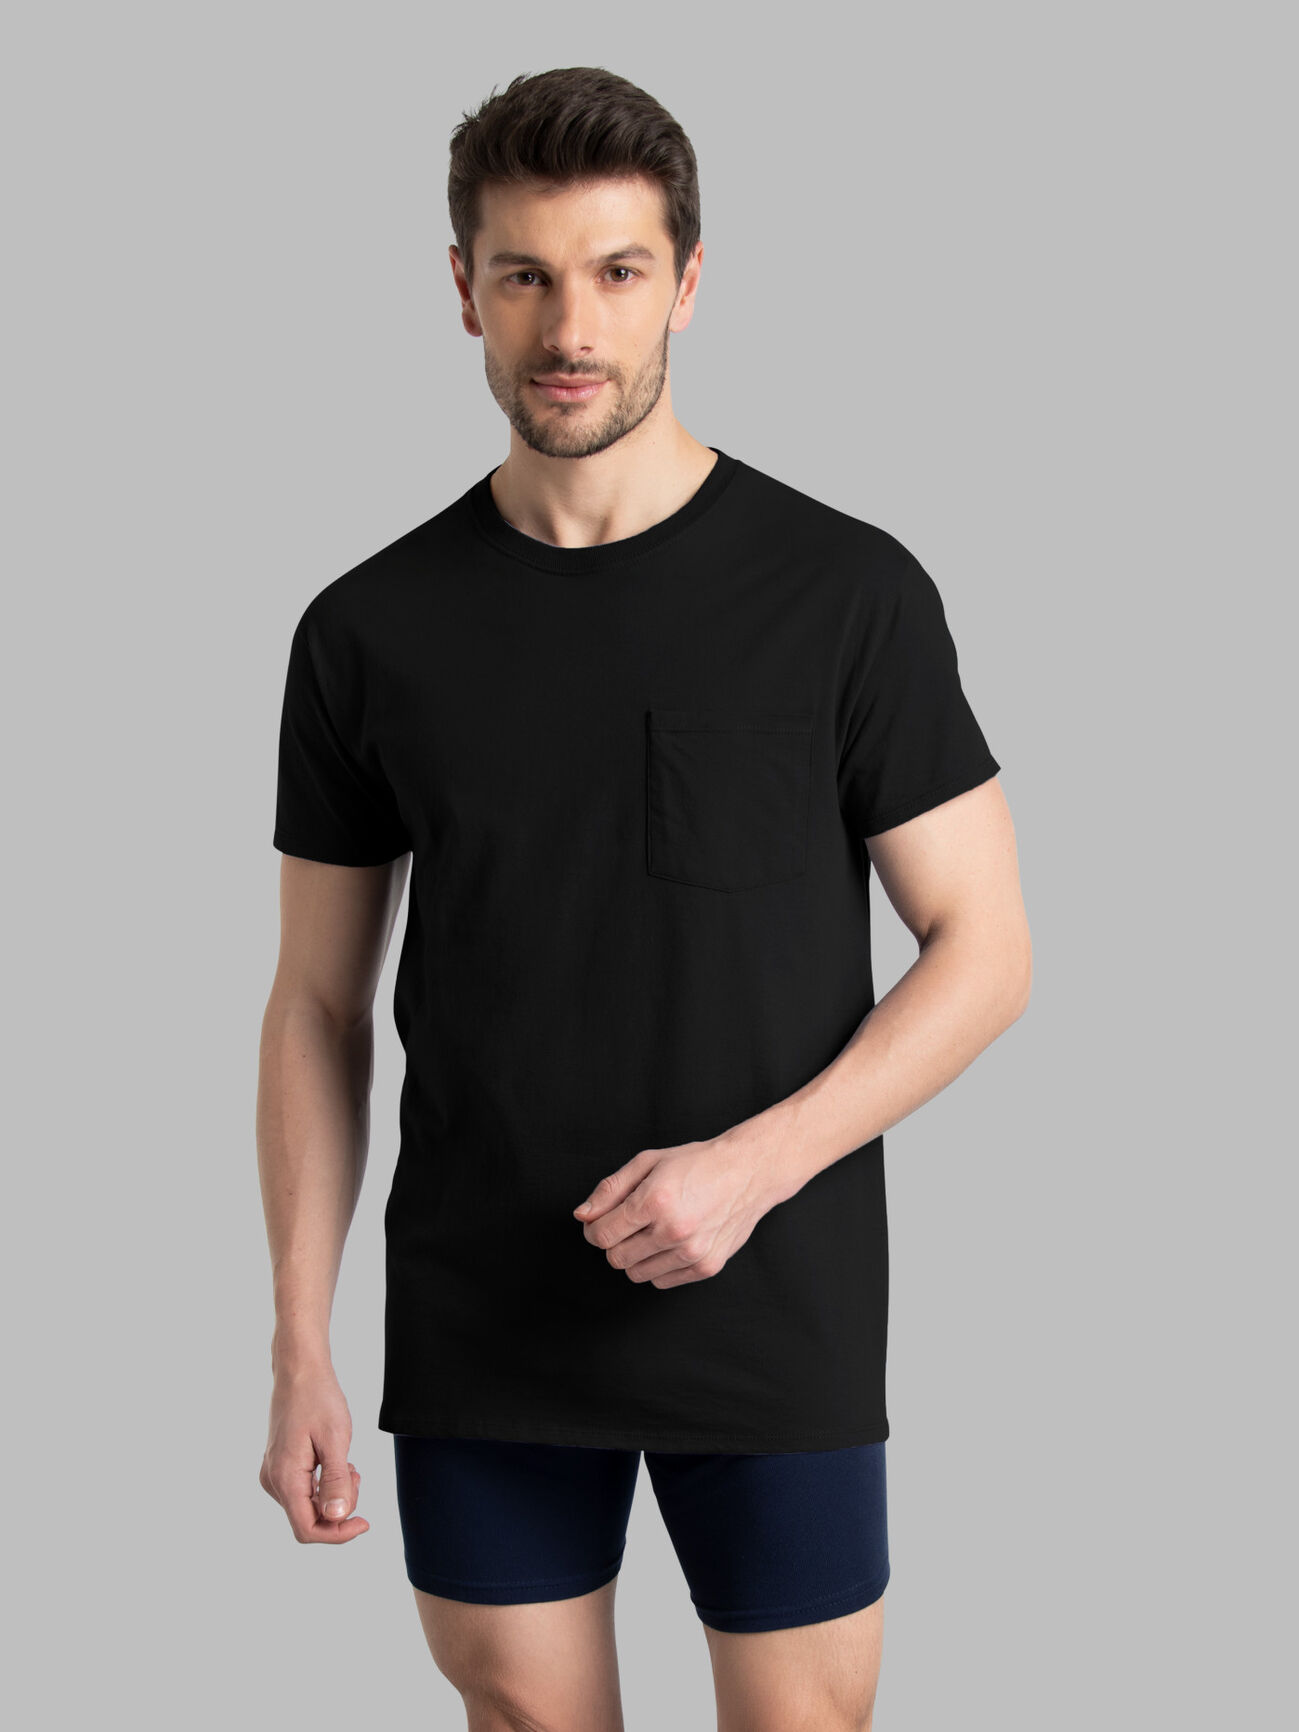 Impoted febric Printed Men Collar T Shirt